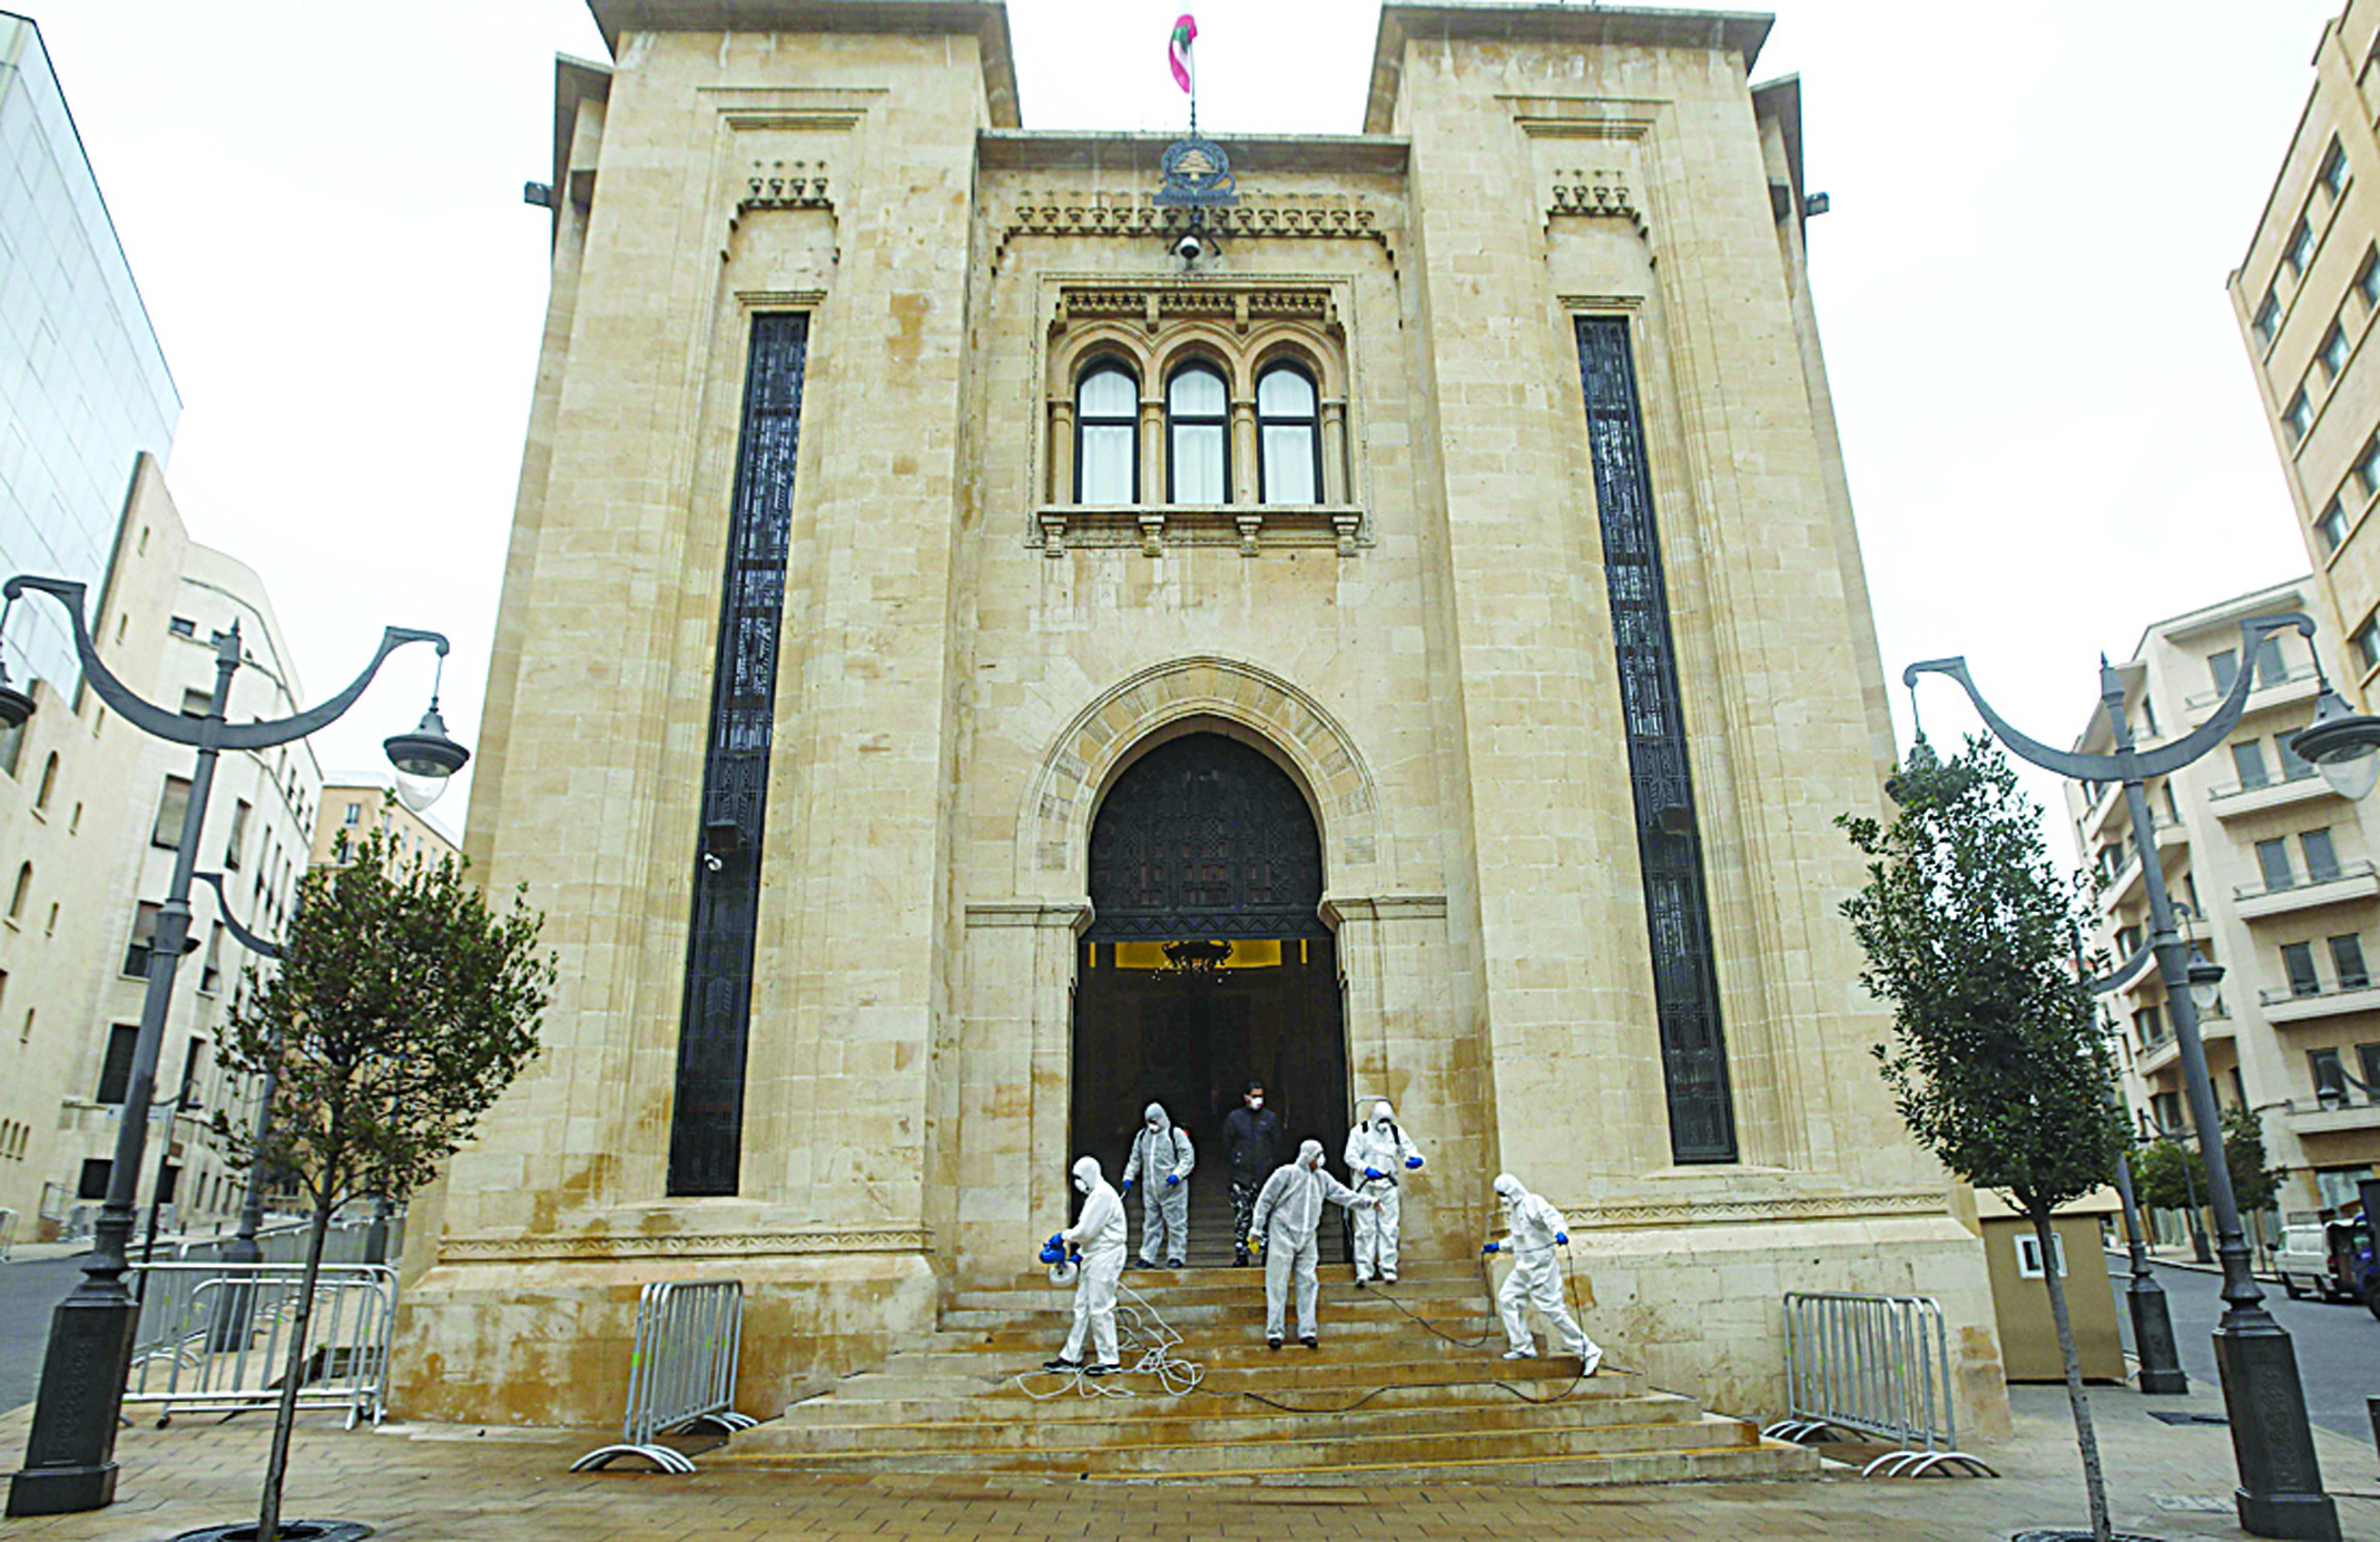 Sanitary workers disinfect the entrance of the Lebanese Parliament in central Beirut on March 10, 2020 amid the spread of coronavirus in the country. (Photo by ANWAR AMRO / AFP)